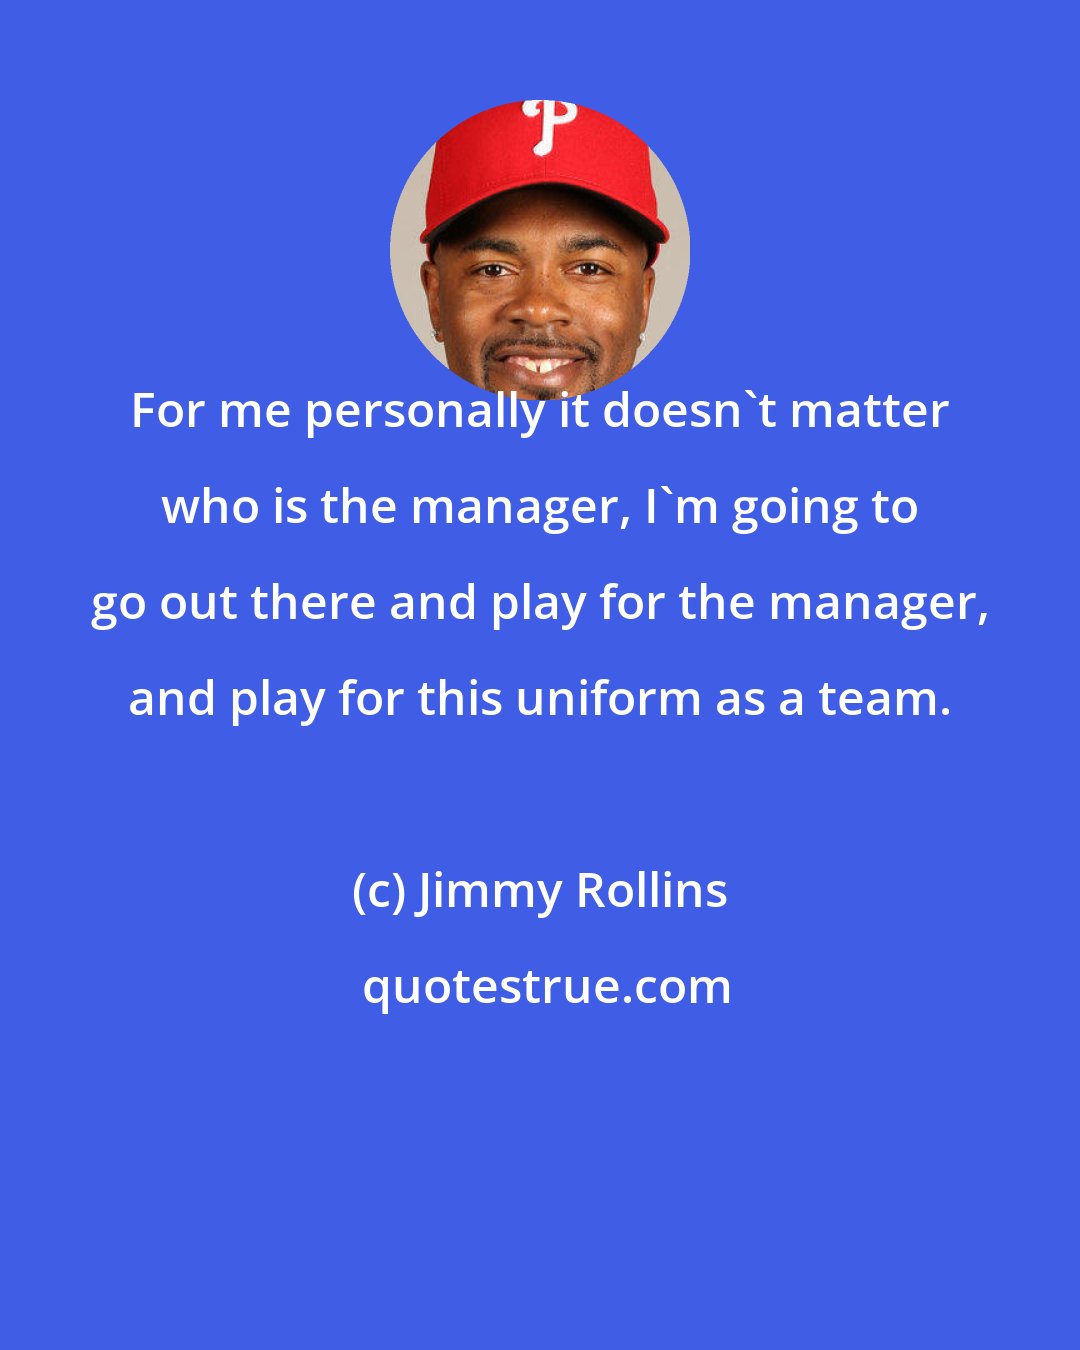 Jimmy Rollins: For me personally it doesn't matter who is the manager, I'm going to go out there and play for the manager, and play for this uniform as a team.